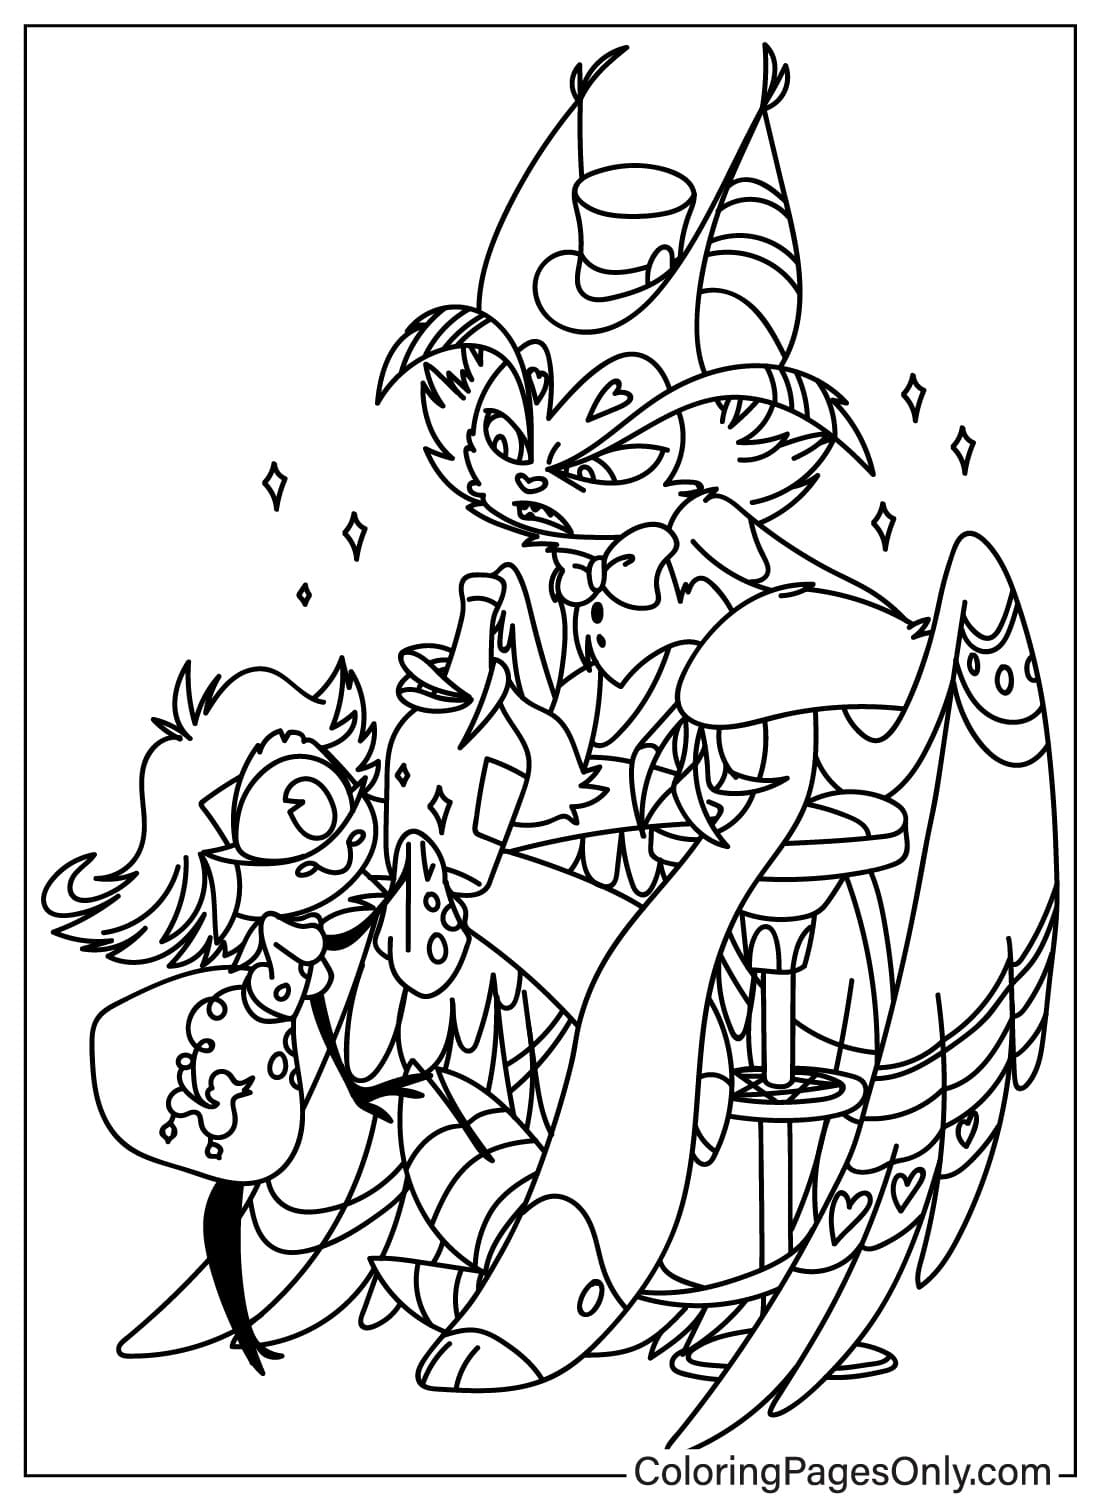 Husk and Niffty Coloring Page from Husk